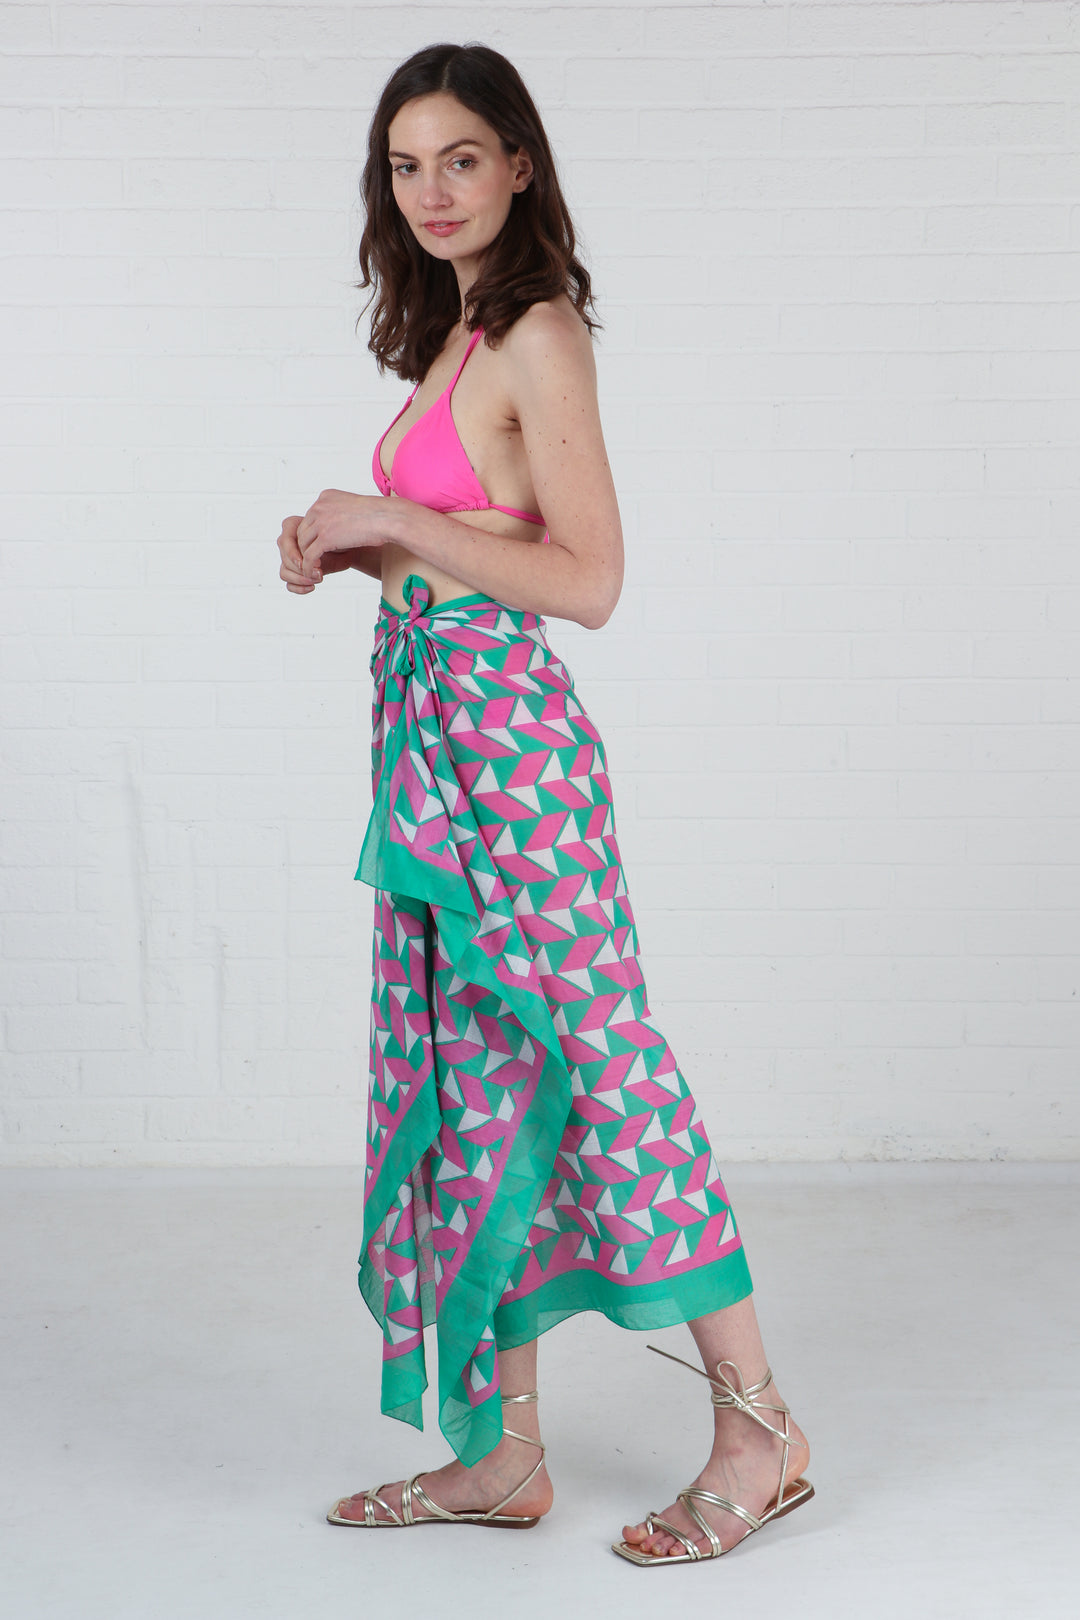 model wearing a pink and green geometric pattern scarf tied at the waist to show that it can be worn as a beach sarong